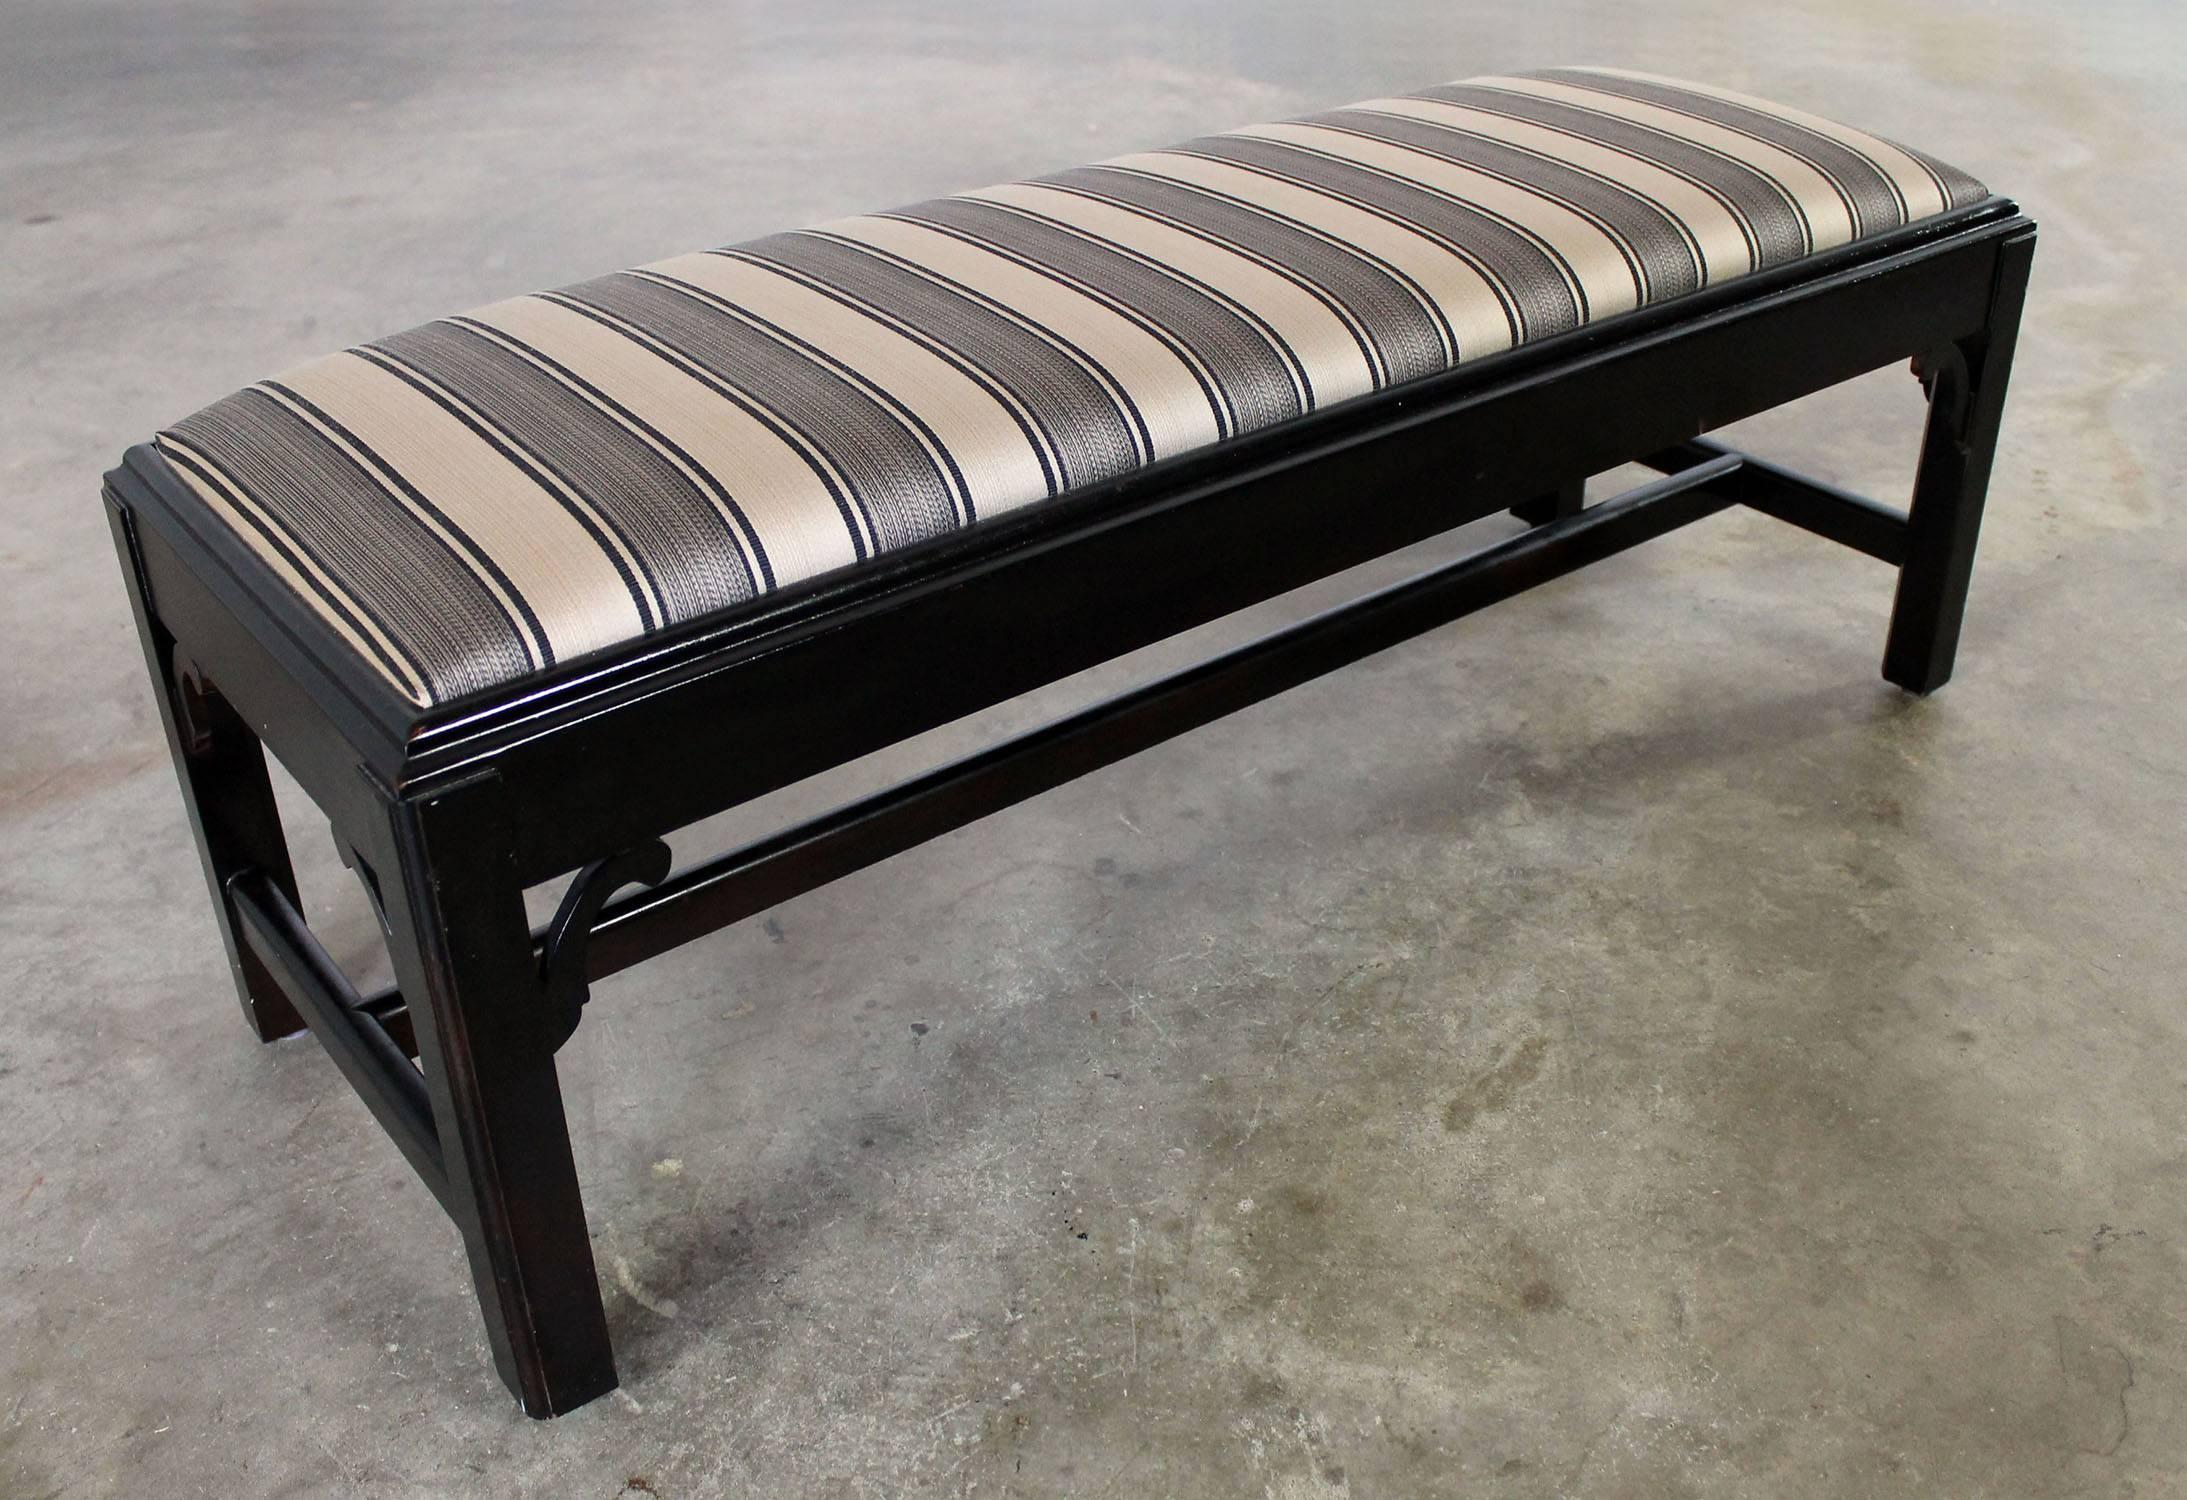 Sassy vintage Chinese Chippendale-style bench with a distressed black painted finish and new black and gold stripe upholstery. Small-scale and perfect for so many places.

Sometimes you just need a little bench. No pedigree. No big designer name.